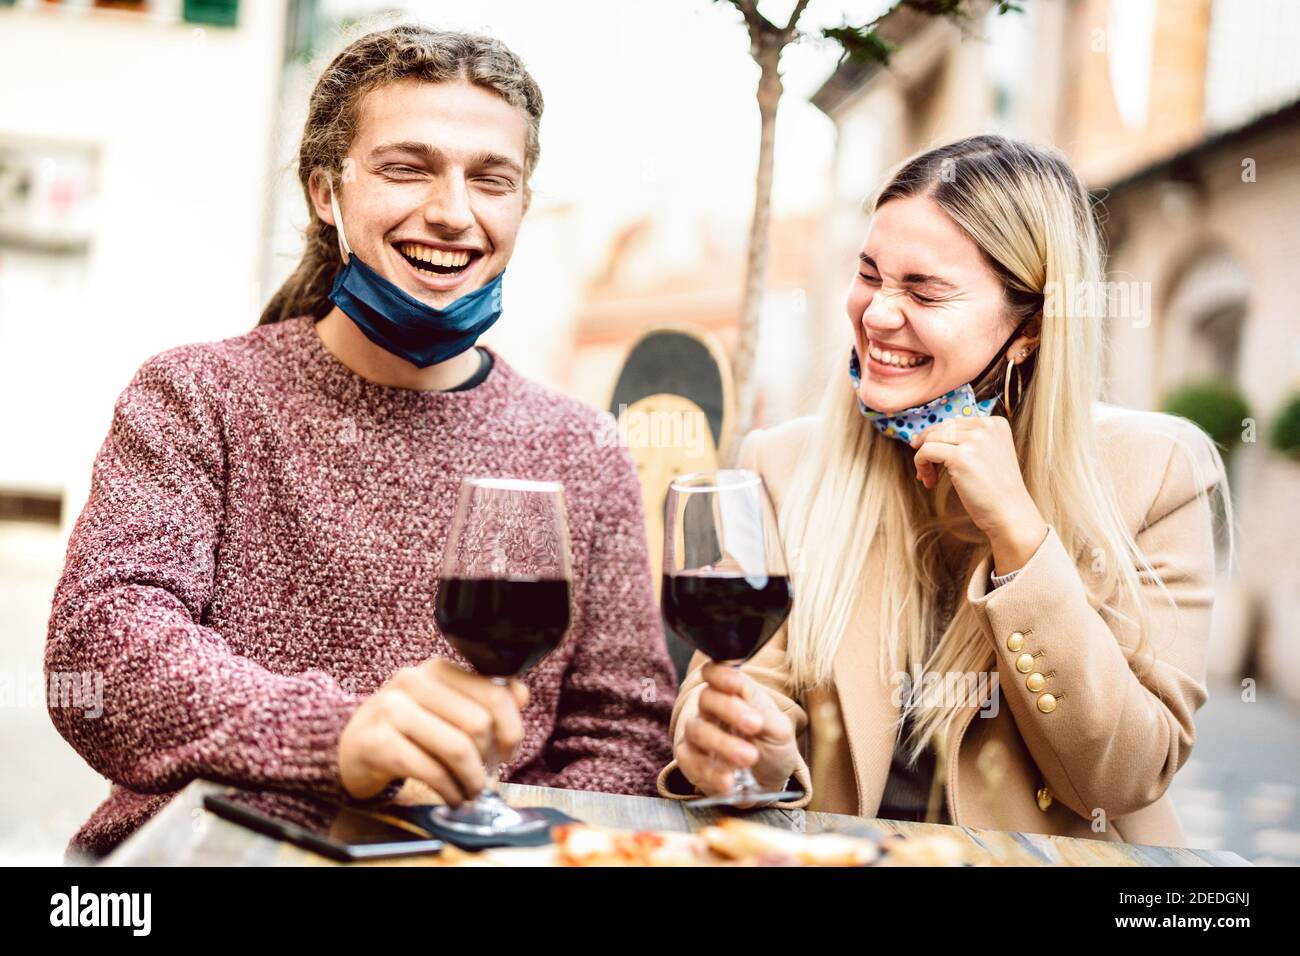 Young couple in love with open face masks having fun at wine bar outdoors - Happy millenial lovers enjoying lunch together at restaurant patio Stock Photo